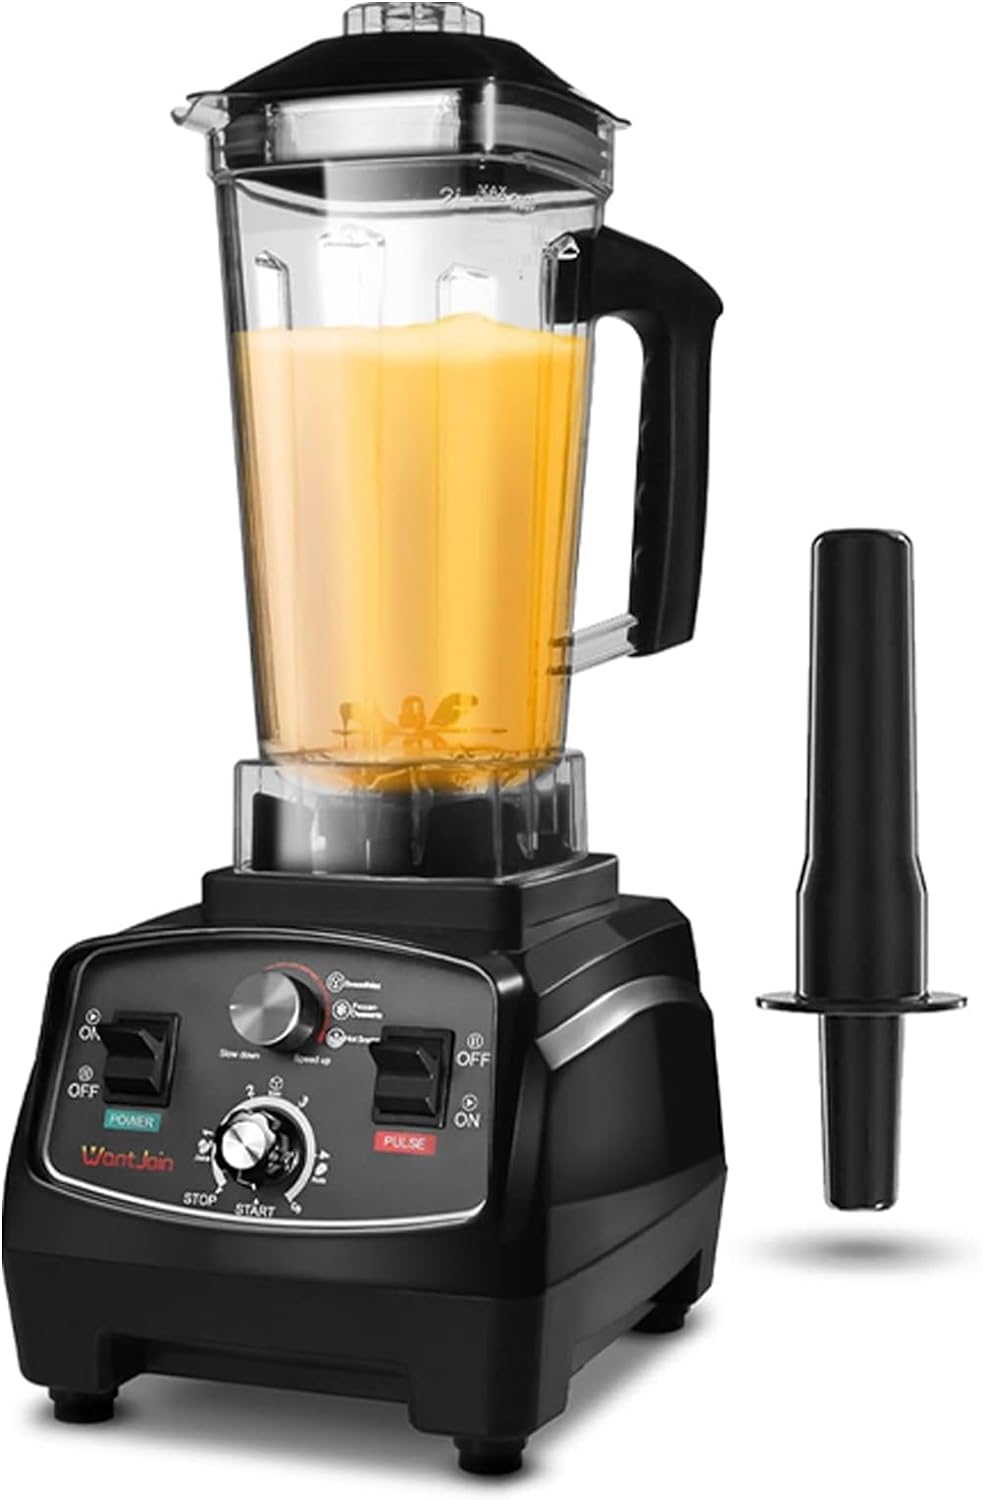 WantJoin Professional Blender, Countertop Blender,Blender for kitchen Max 1800W High Power Home and Commercial Blender with Timer, Smoothie Maker 2200ml for Crushing Ice, Frozen Dessert, Soup,fish